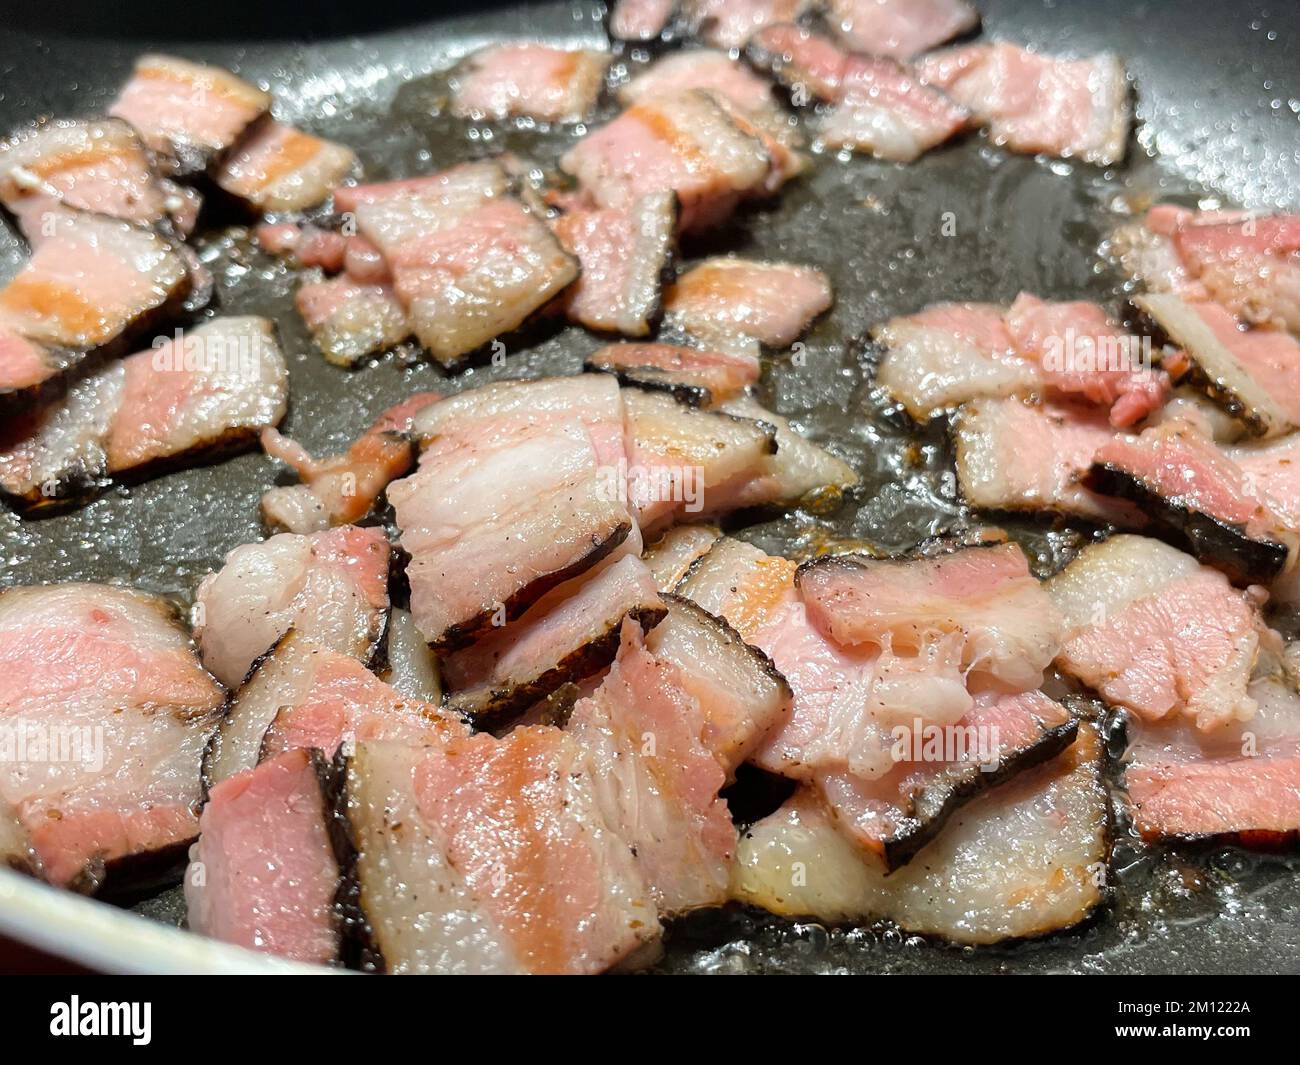 https://c8.alamy.com/comp/2M1222A/fried-fat-bacon-close-up-in-a-frying-pan-butter-with-bubbles-close-up-2M1222A.jpg